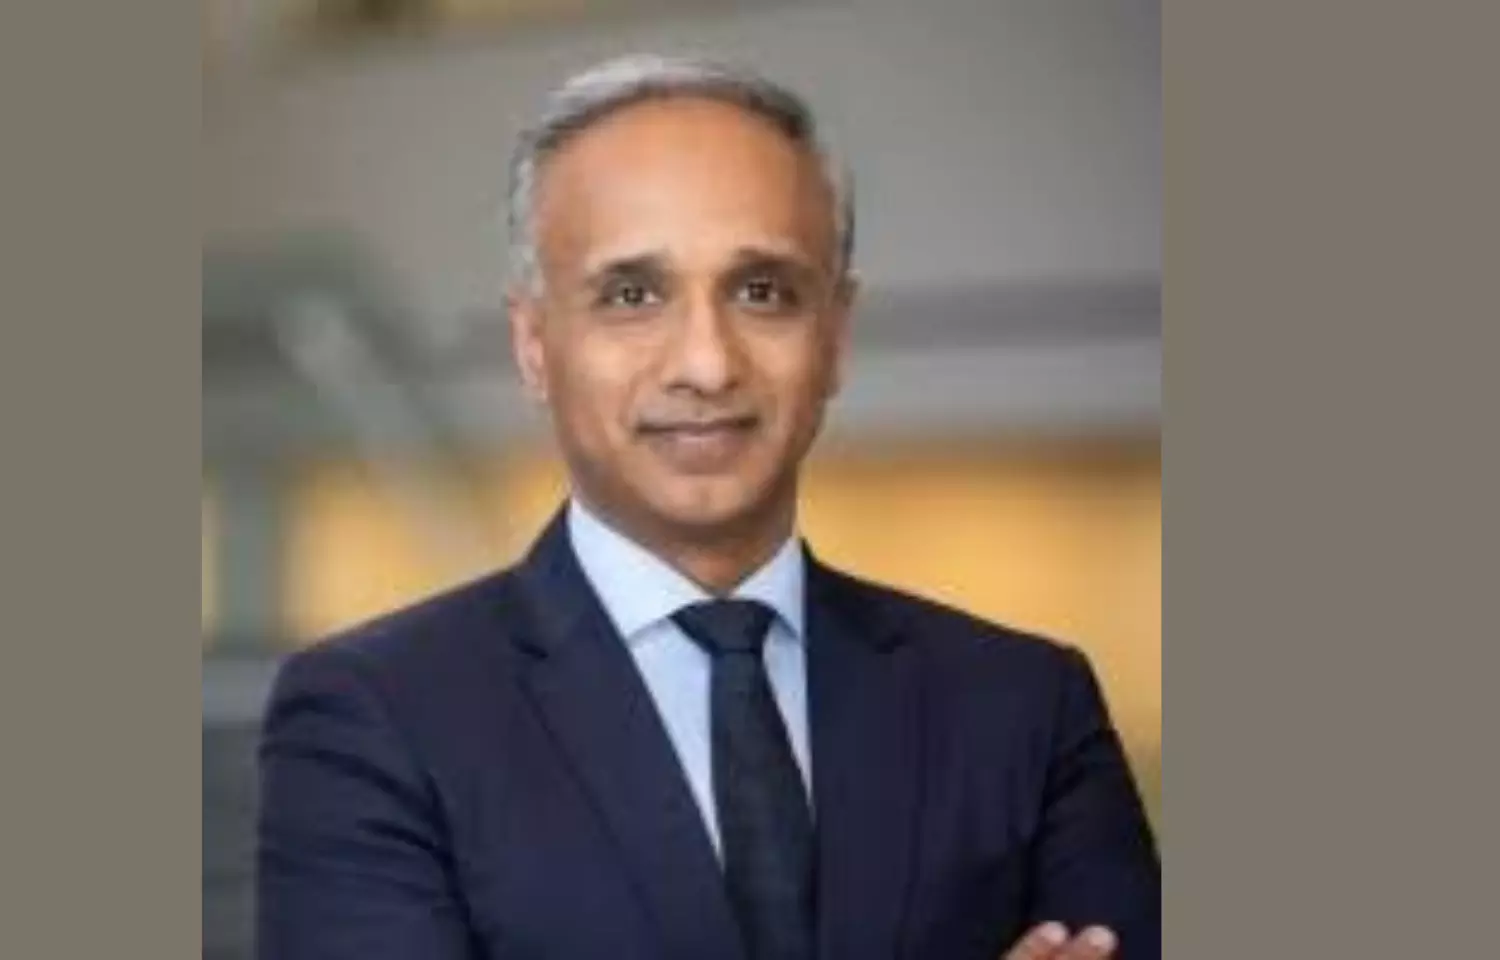 Mathai Mammen leaves position as JnJ Executive Vice President, Pharmaceuticals, RnD